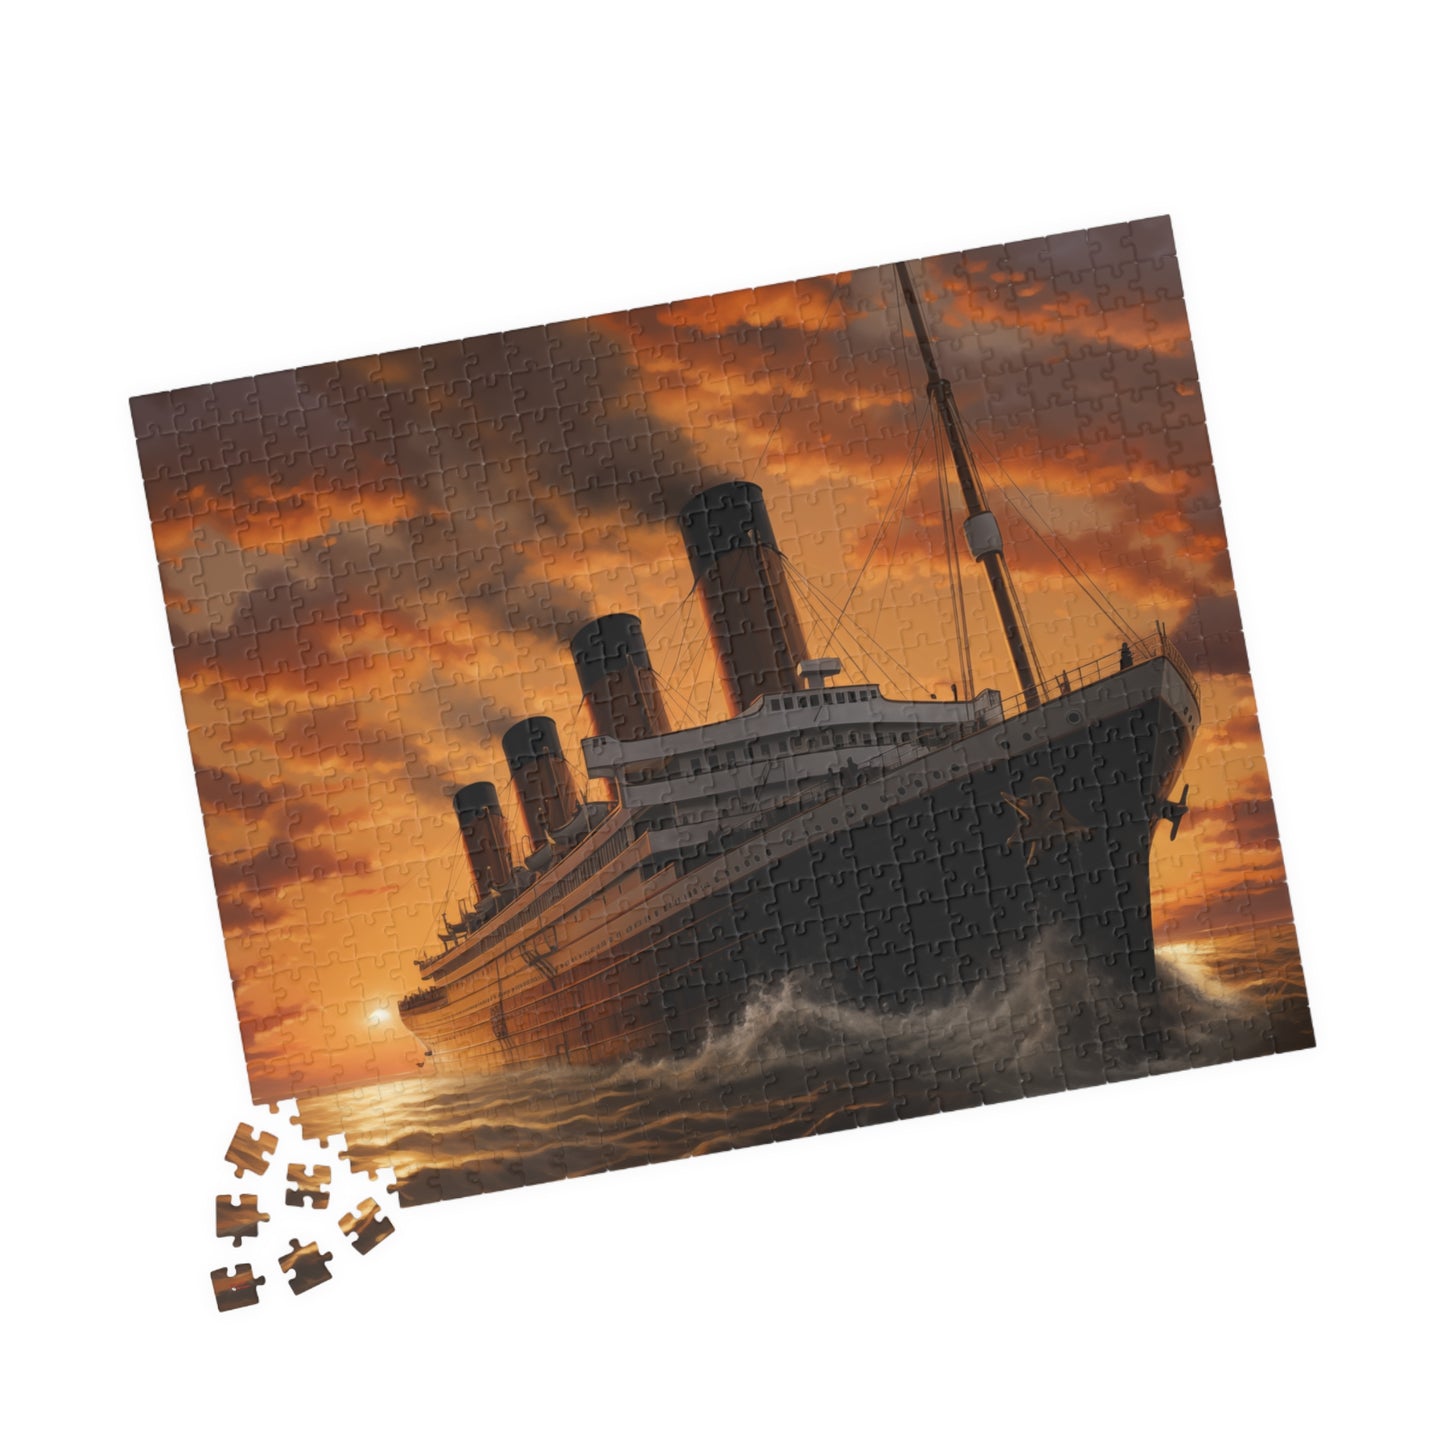 Titanic Sunrise Puzzle (110, 252, 500, 1014-piece) Queen Mary Large Ship Beautiful Scenery Ocean Sea Cruise Maiden Voyage Jigsaw Jig Saw